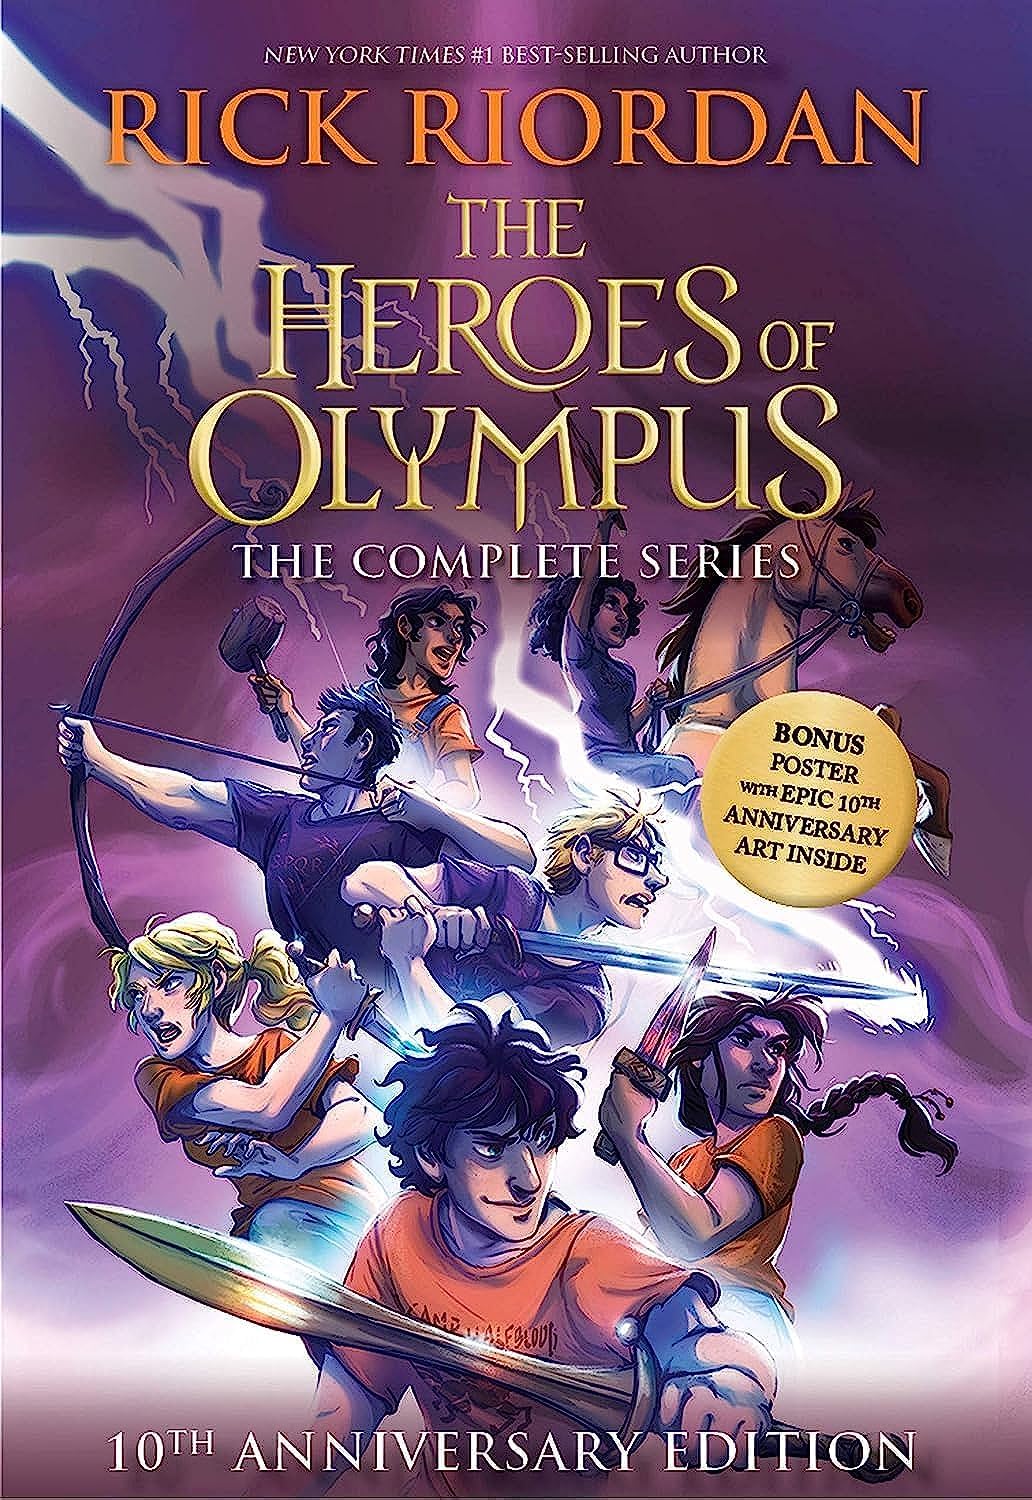 Heroes of Olympus Paperback Boxed Set, The-10th Anniversary Edition (The Heroes of Olympus)